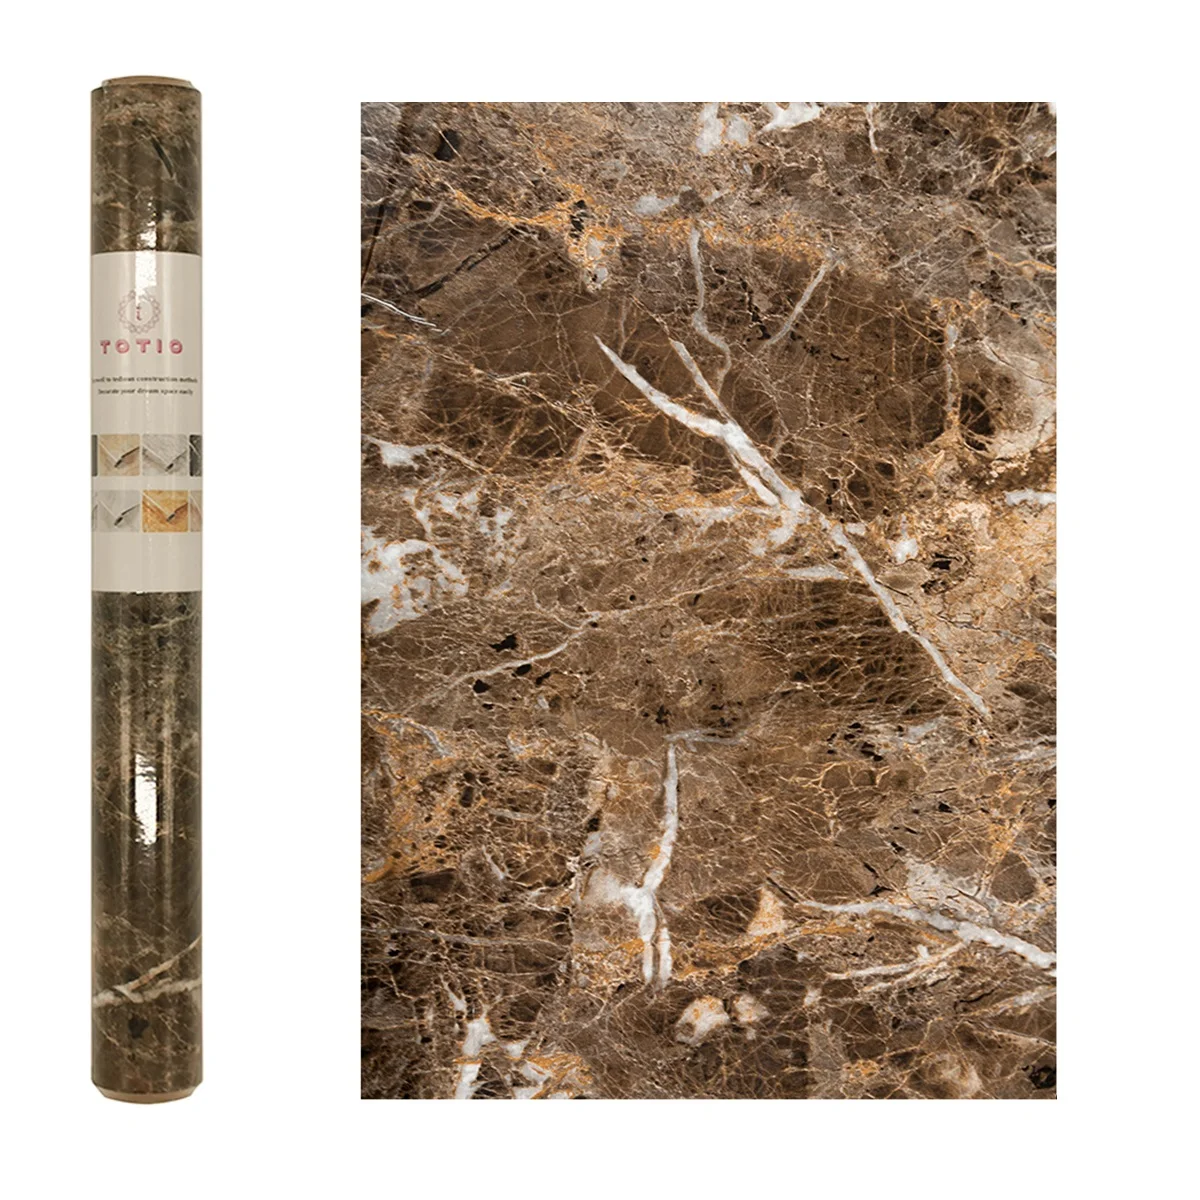 TOTIO Brown Marble Self Ahesive Wallpaper Peel and Stick High Temperature Resistant Contact Paper Vinyl Wall Paper Home Decor